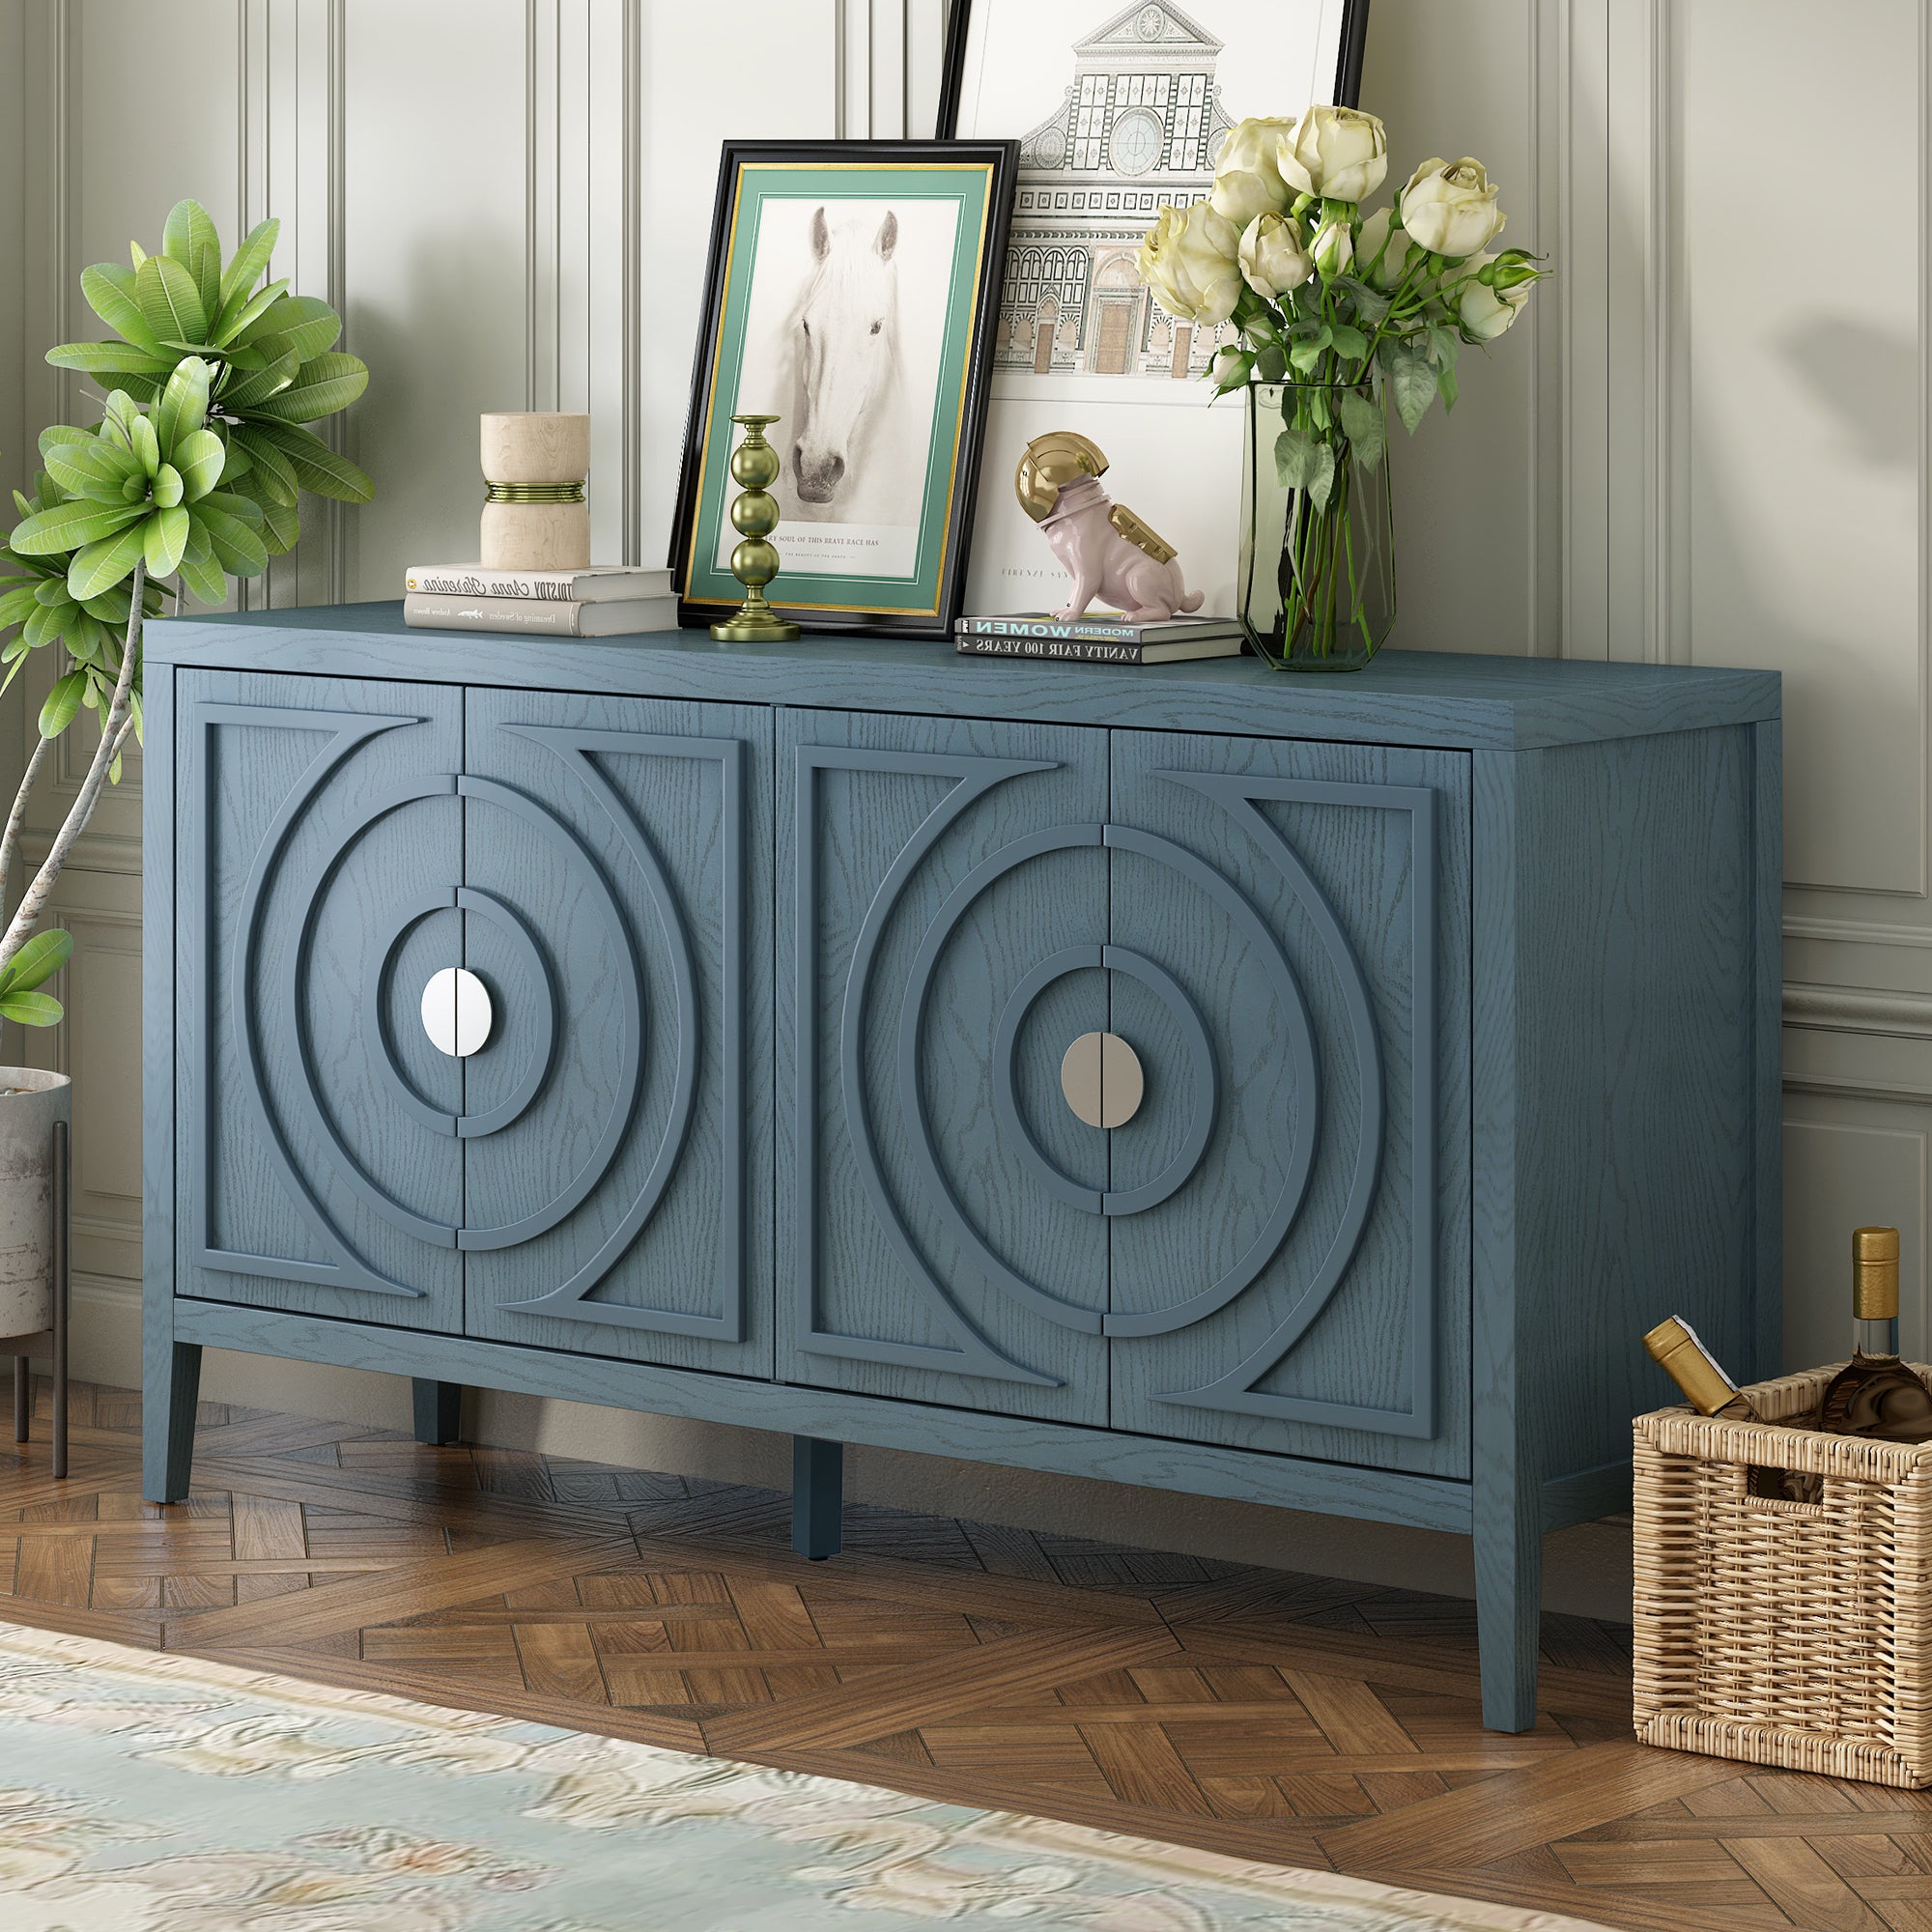 CONSOLE TABLE/ACCENT CABINET/SIDEBOARD - Ross HomeGoods